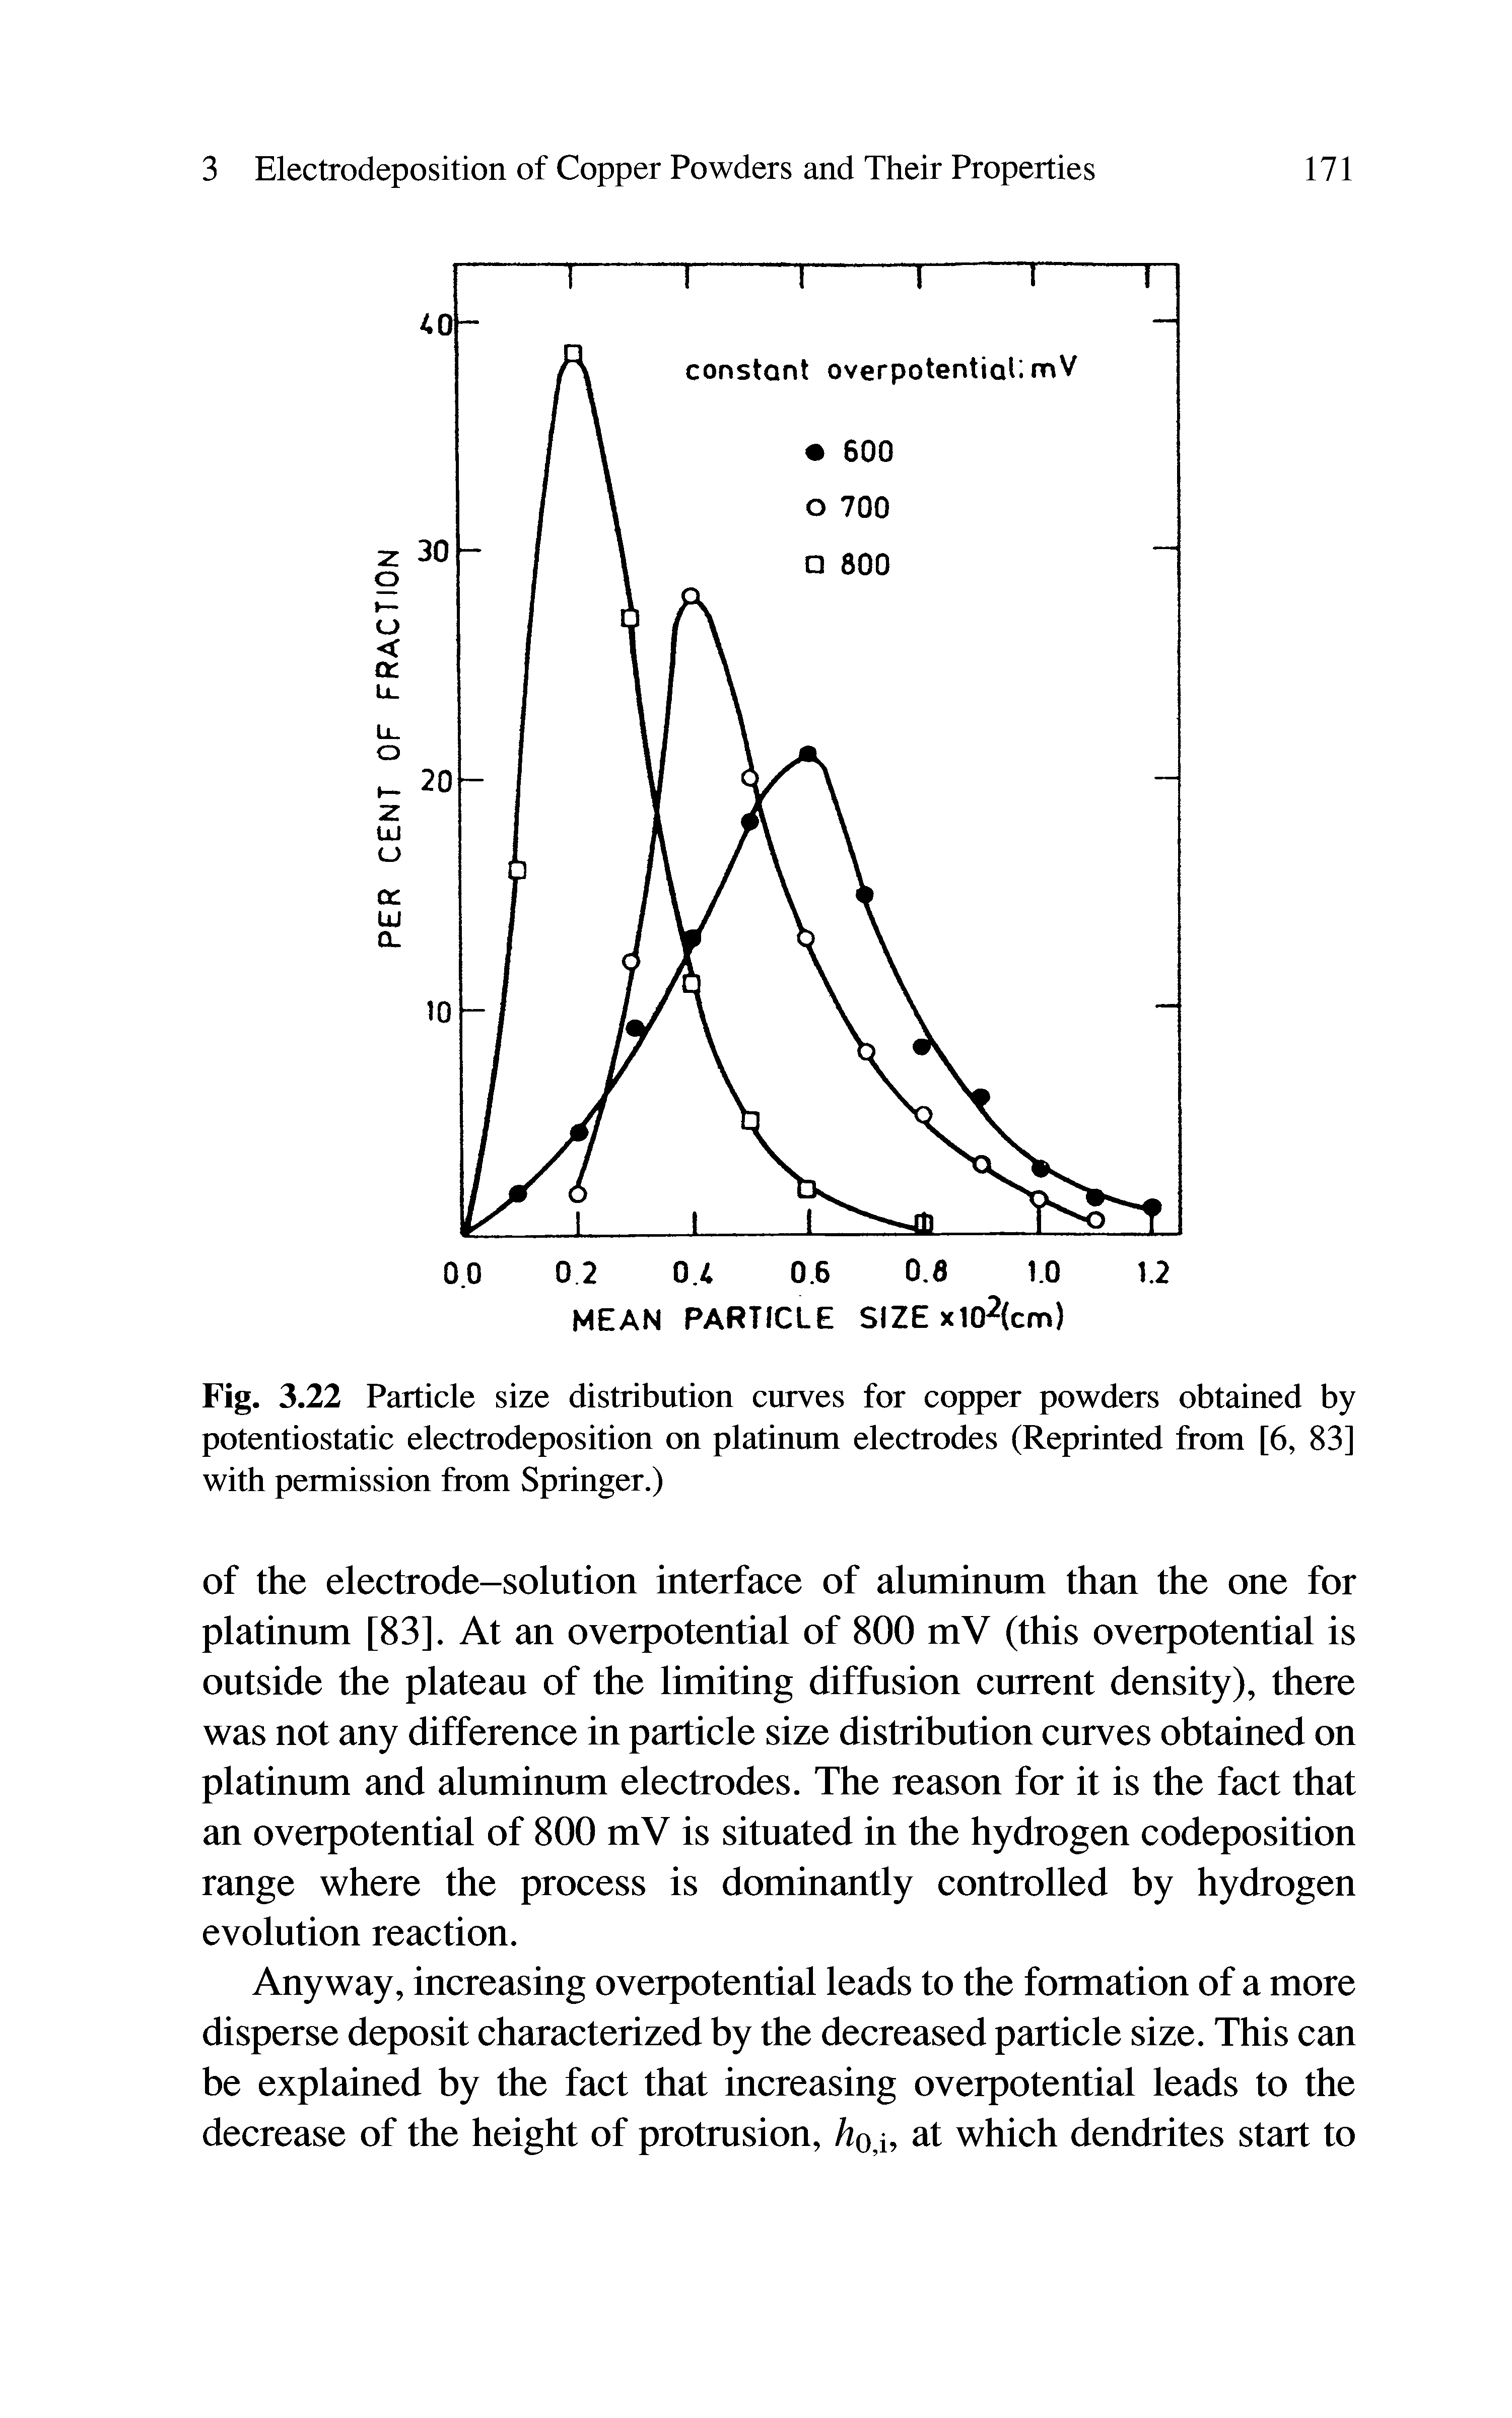 Fig. 3.22 Particle size distribution curves for copper powders obtained by potentiostatic electrodeposition on platinum electrodes (Reprinted from [6, 83] with permission from Springer.)...